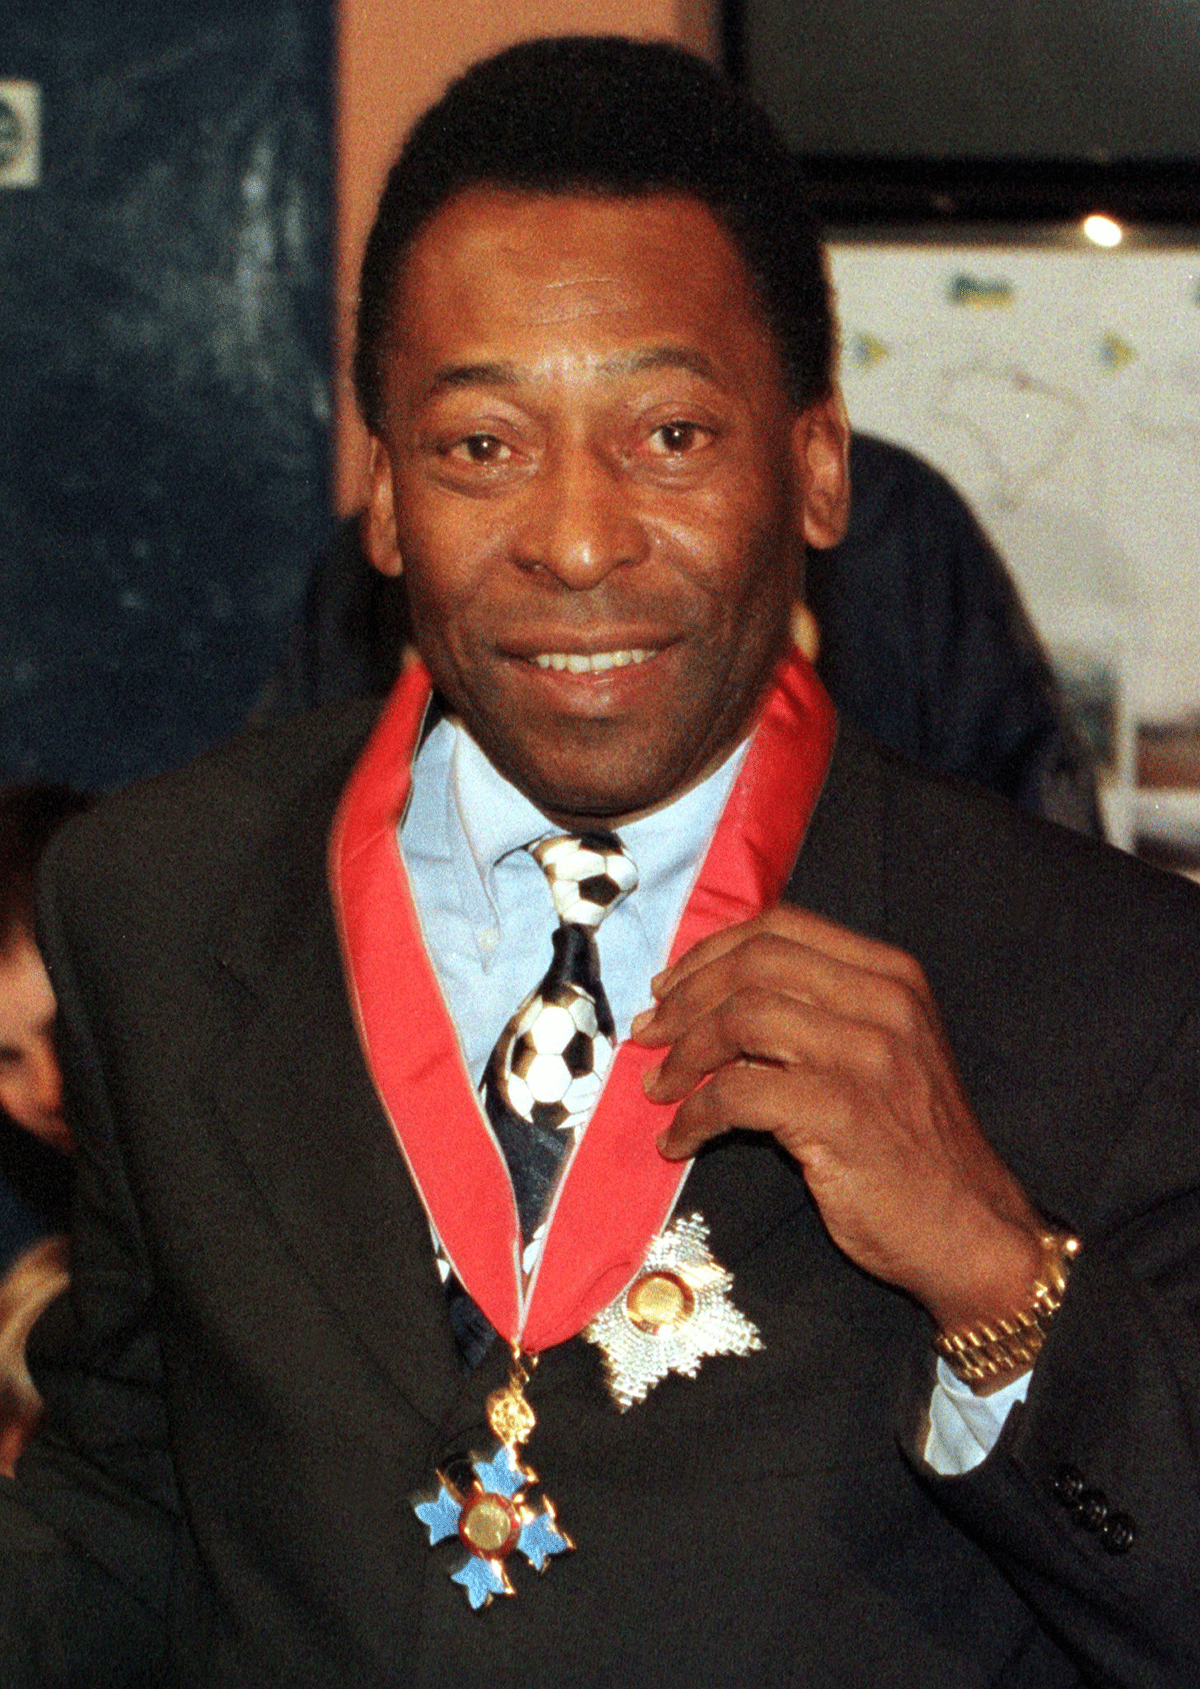 Pele, (L), shows off his KBE (Knight Commander of the British Empire) medal awarded to him by Queen Elizabeth II December 3, 1997